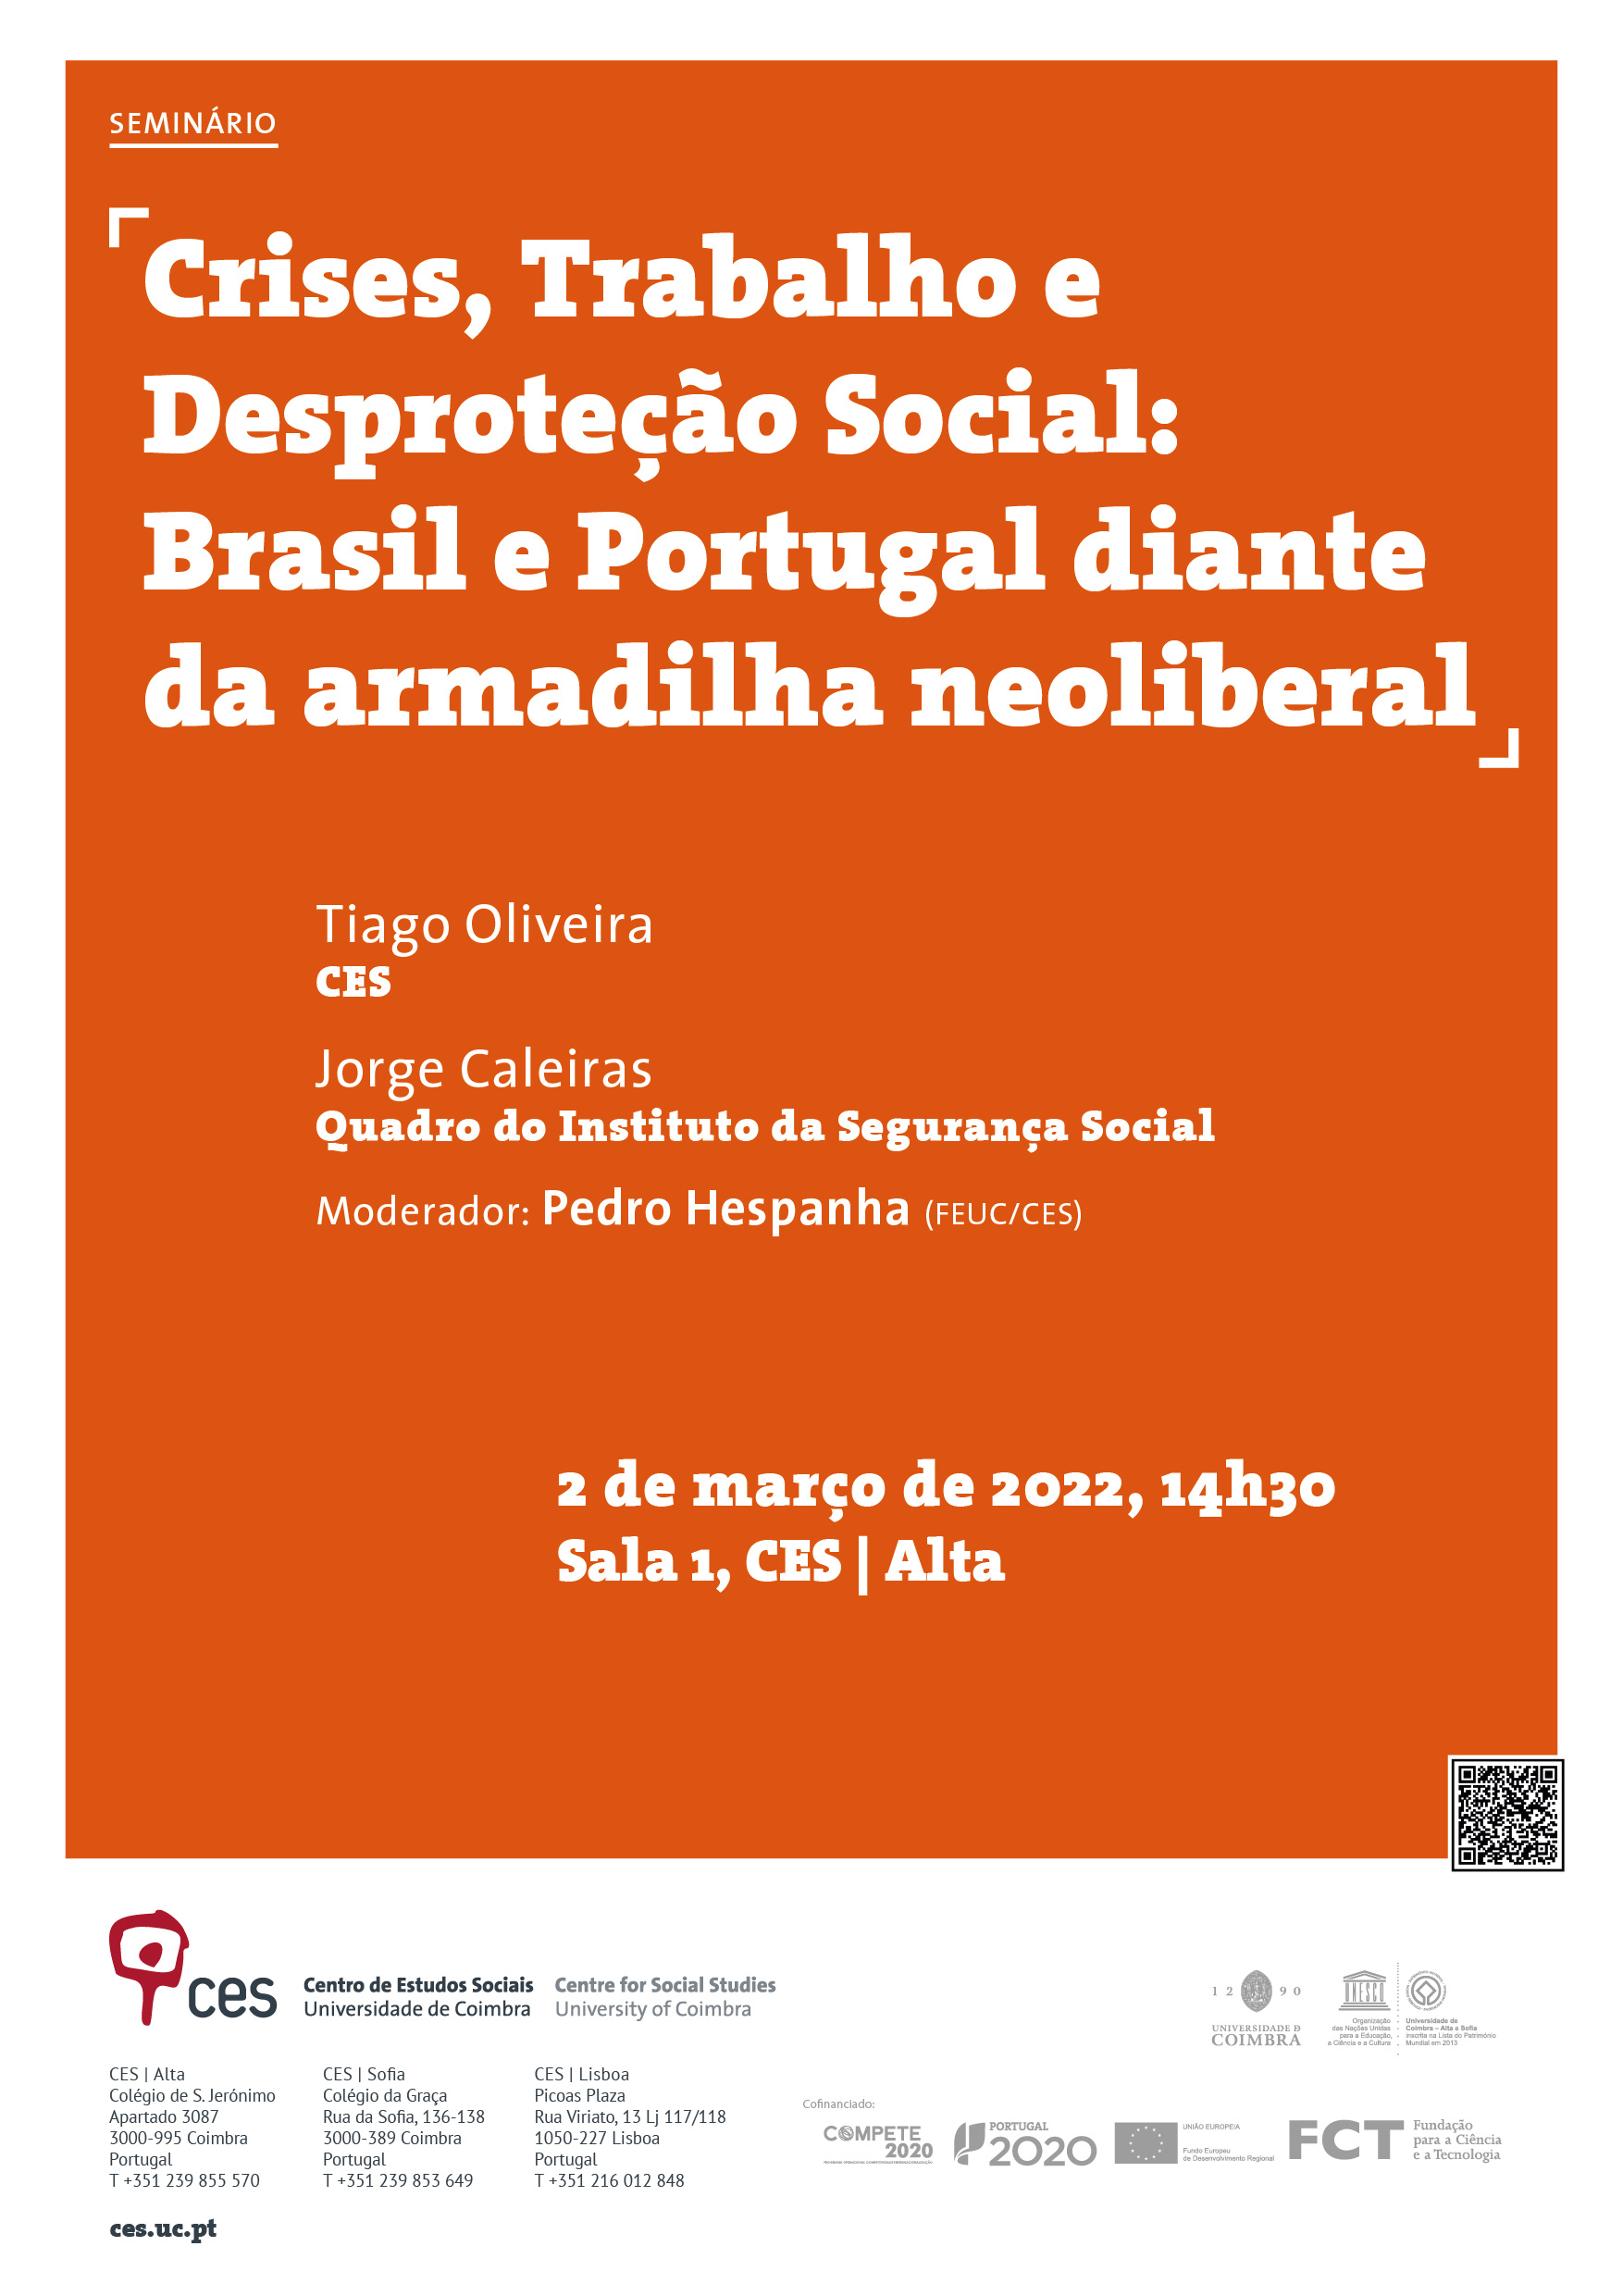 Crises, Labour and Social Unprotection: Brazil and Portugal in the face of the neo-liberal trap<span id="edit_36711"><script>$(function() { $('#edit_36711').load( "/myces/user/editobj.php?tipo=evento&id=36711" ); });</script></span>